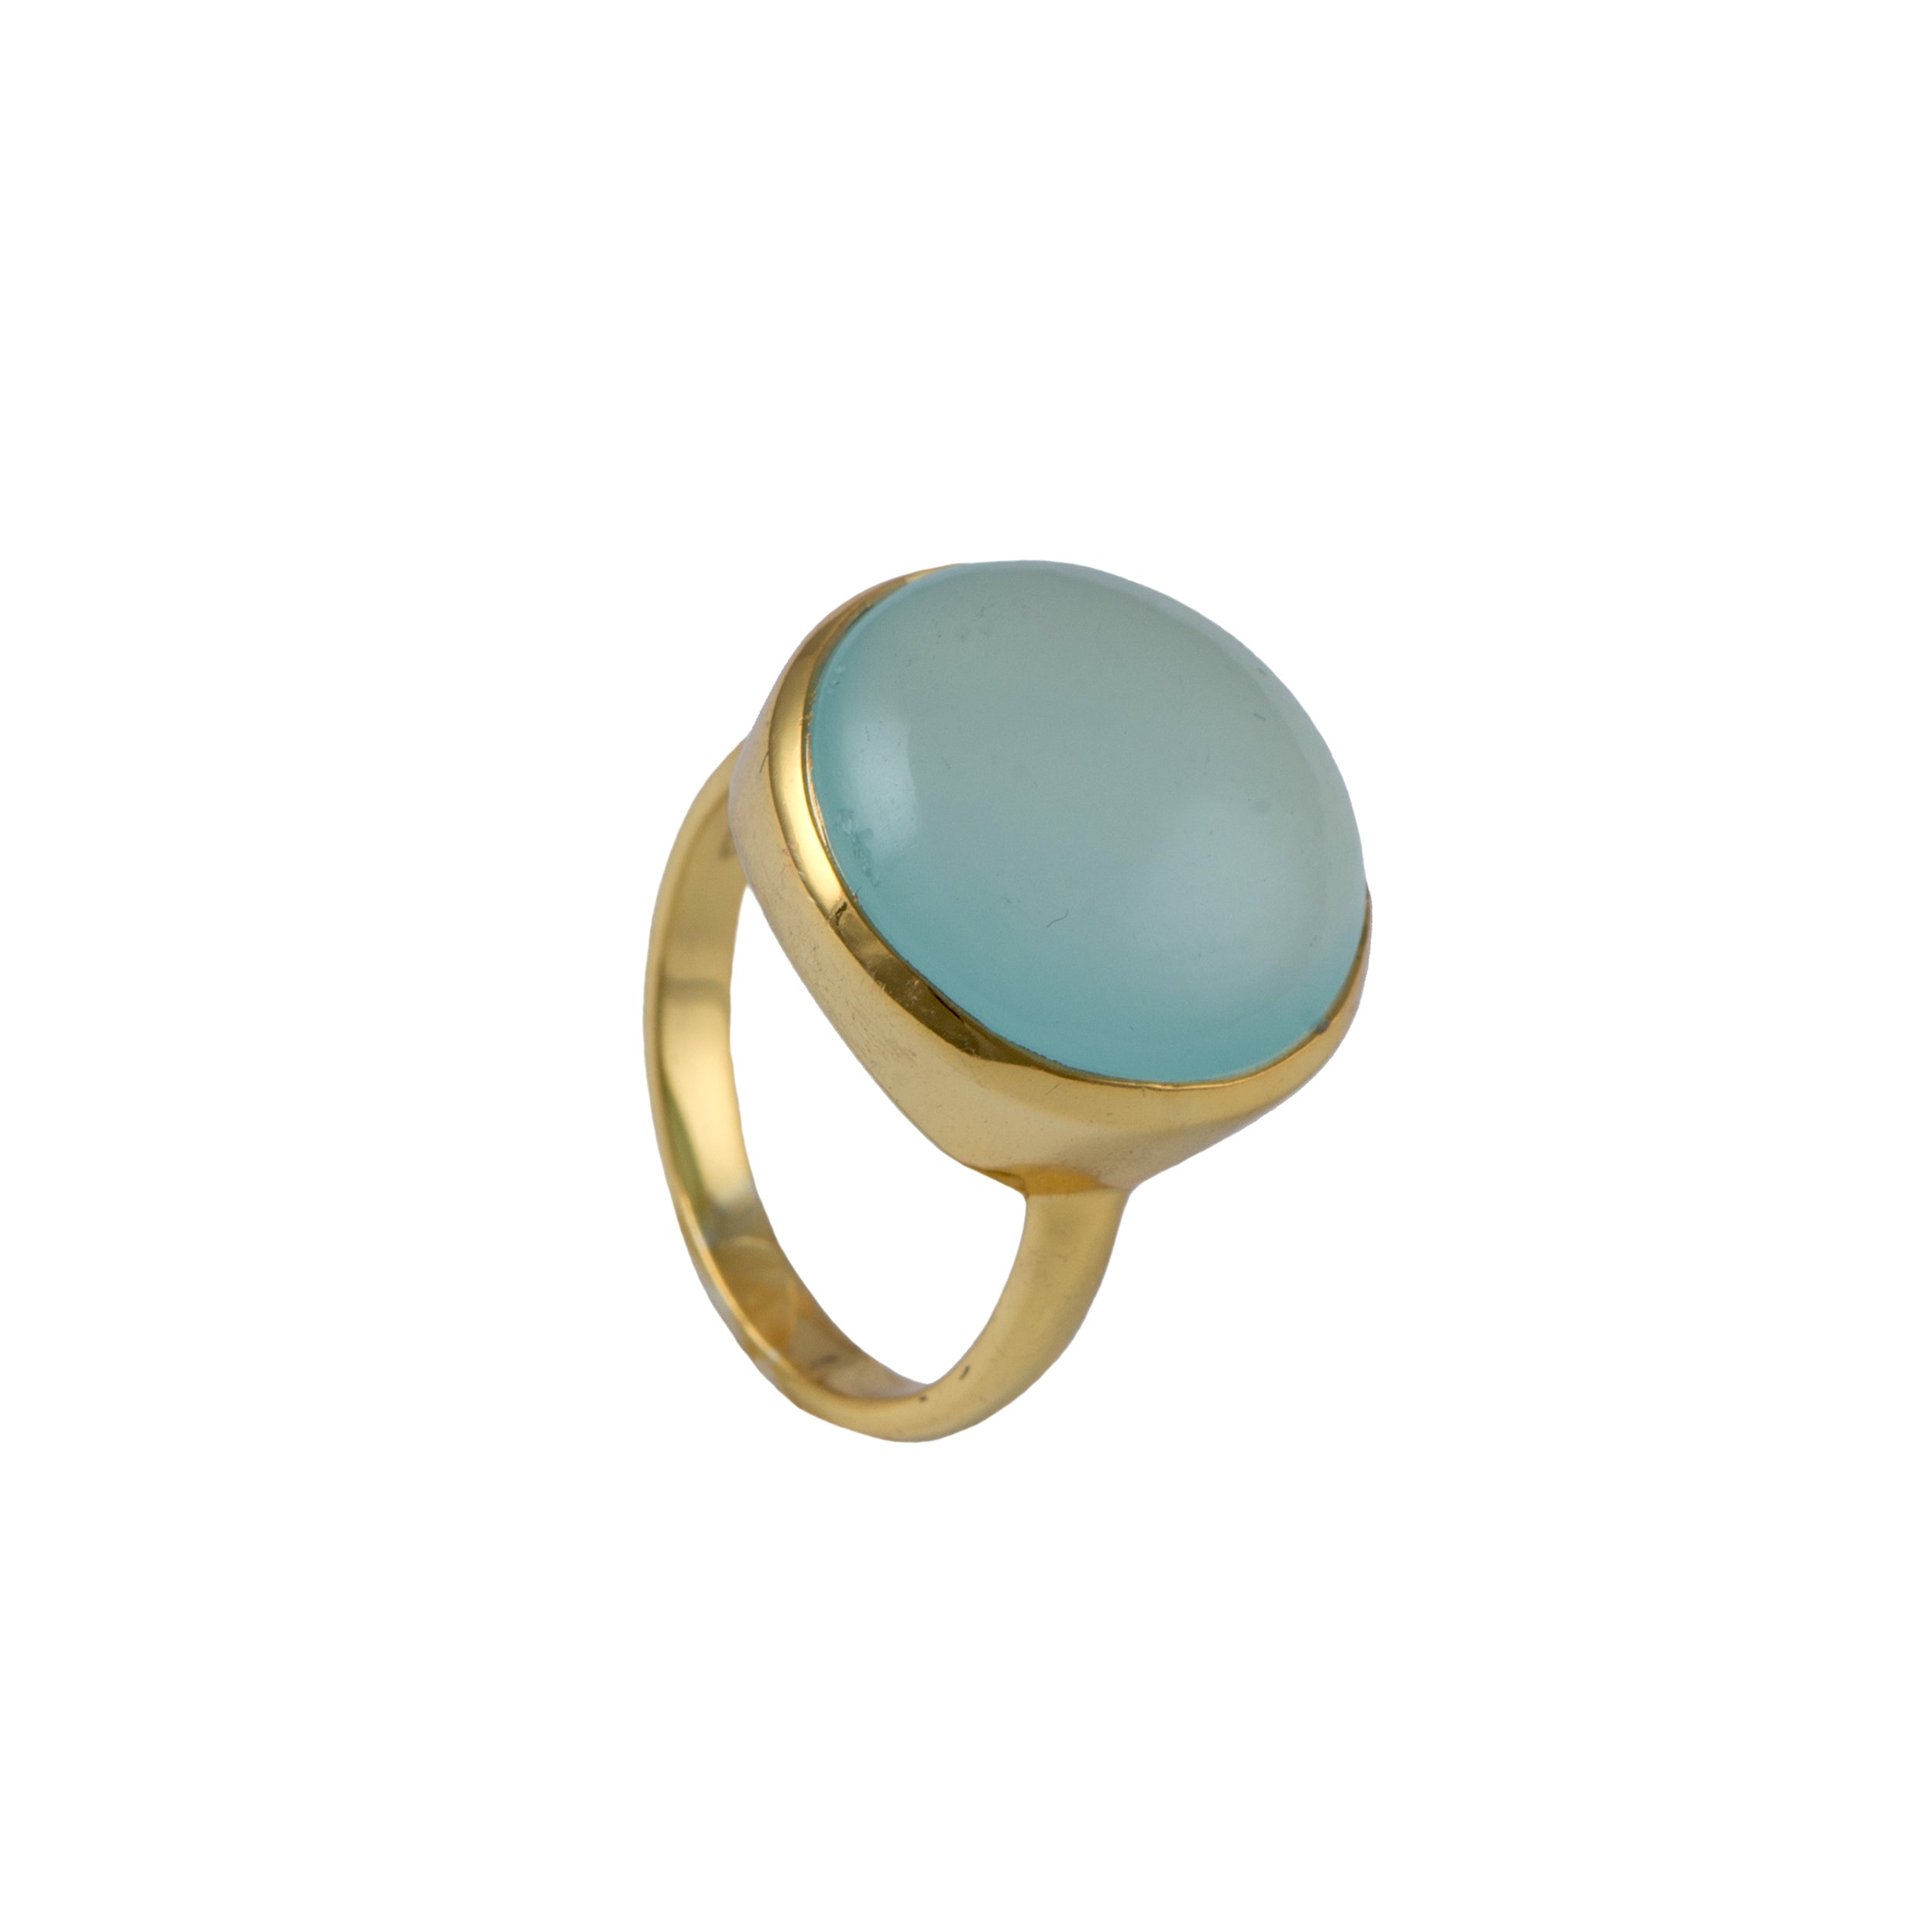 Cabochon Round Cut Natural Gemstone Gold Plated Sterling Silver Ring - Aqua Chalcedony